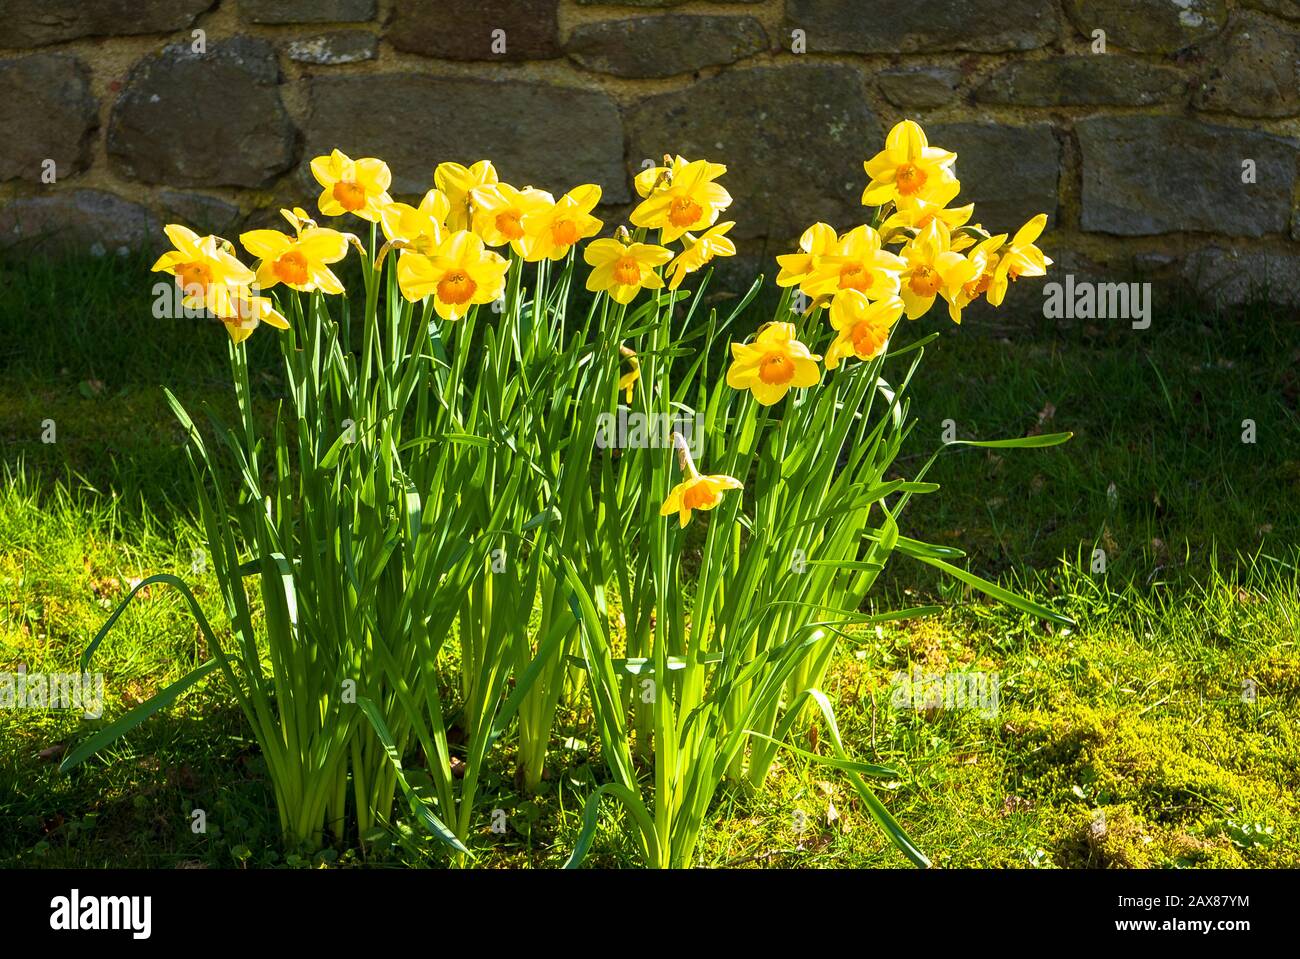 A bright bouquet of living daffodils growing on a grass verge in an English village in March Stock Photo